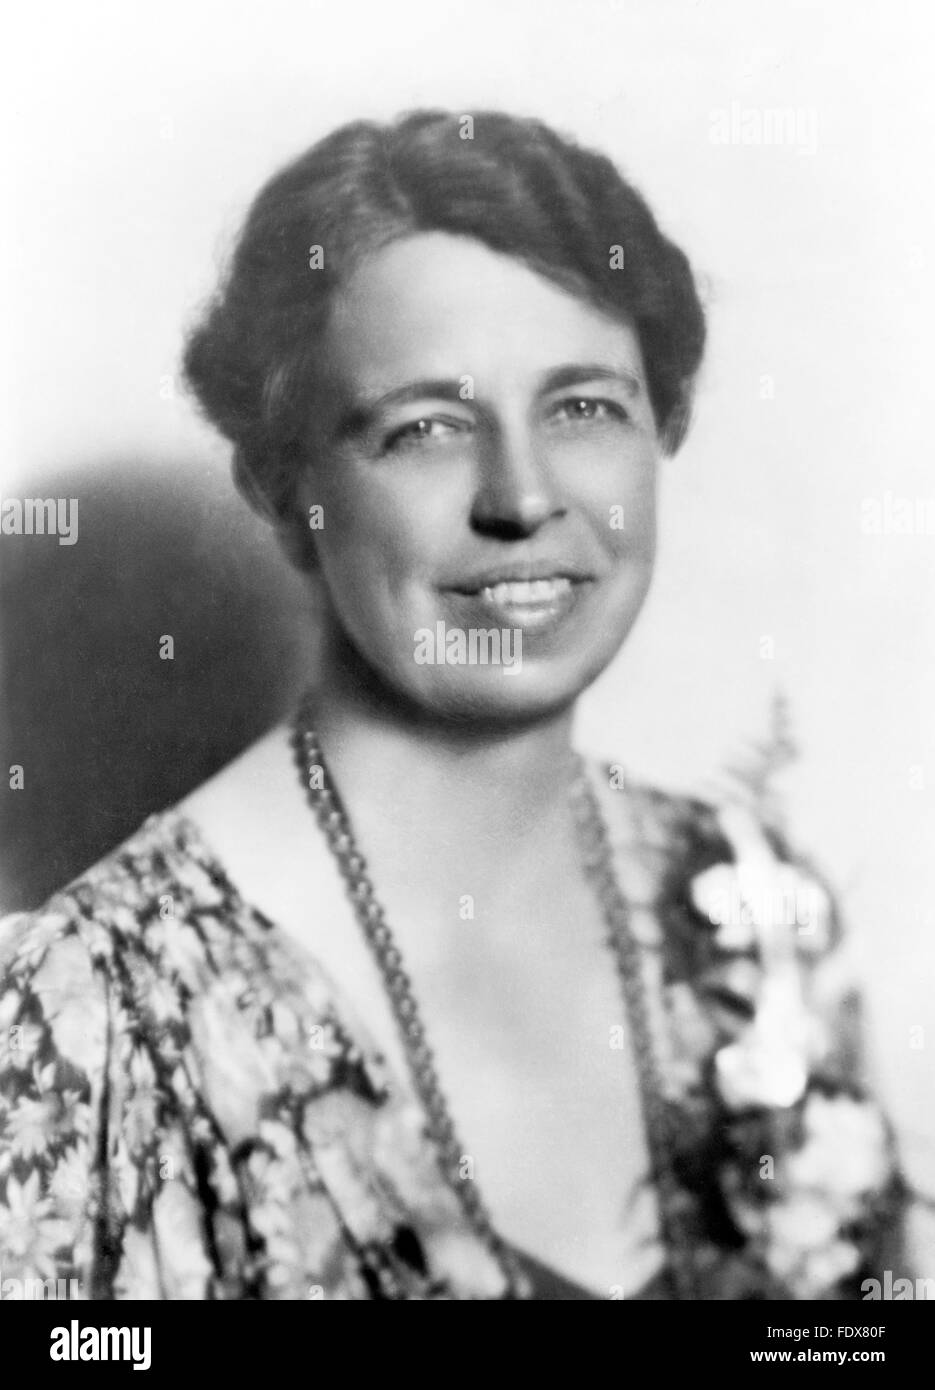 Eleanor Roosevelt, wife of Franklin D Roosevelt, the 32nd President of the USA. Photo c.1933 Stock Photo